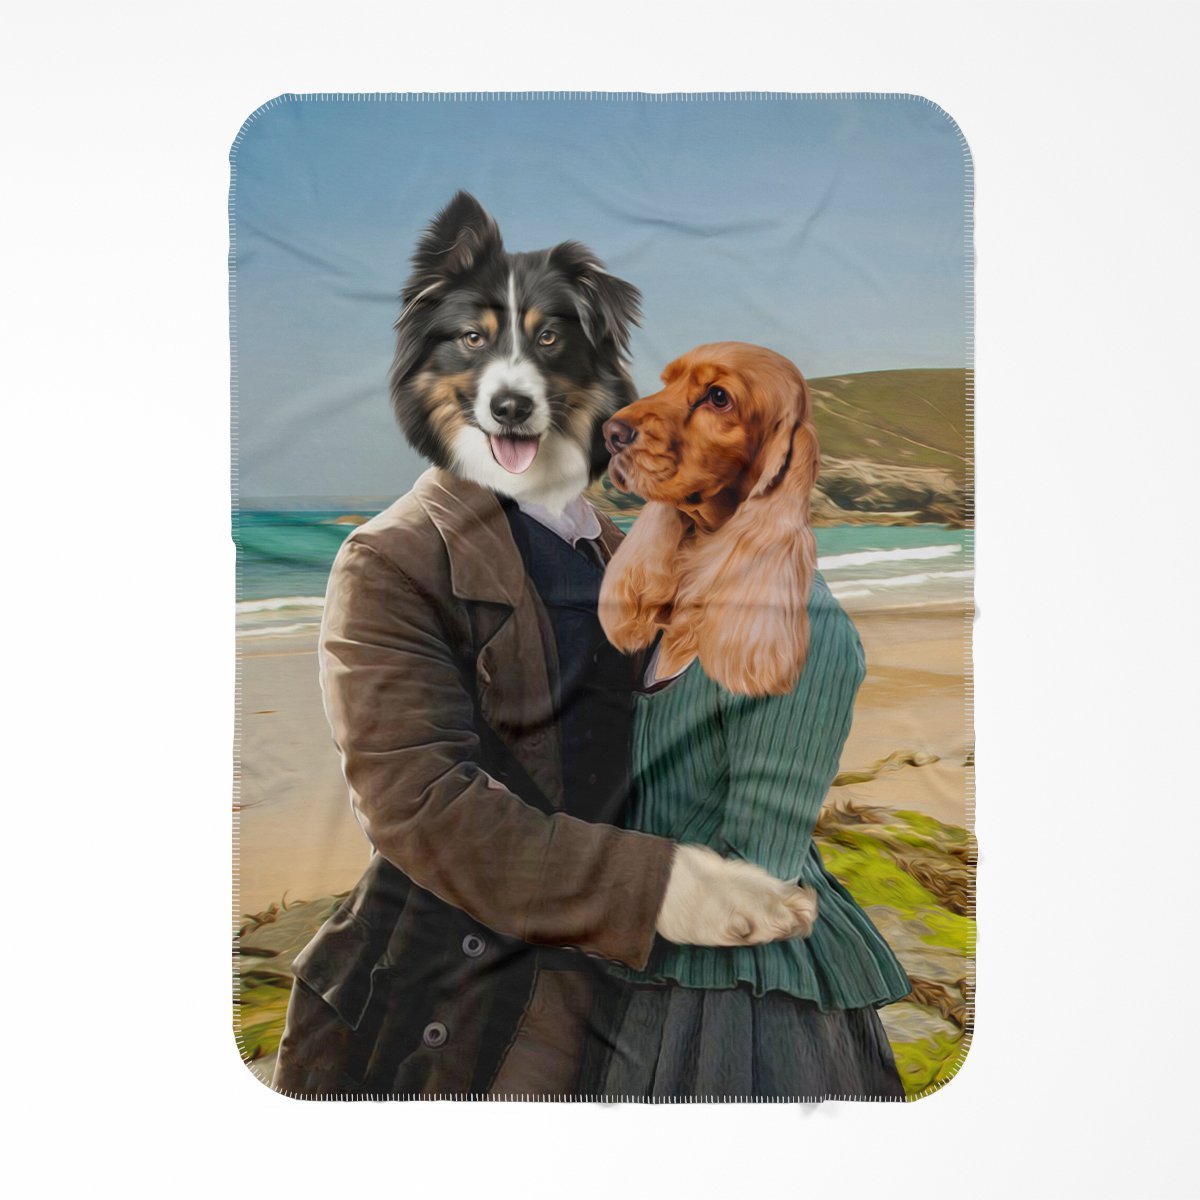 Poldark: Custom Pet Blanket - Paw & Glory - #pet portraits# - #dog portraits# - #pet portraits uk#Paw and glory, Pet portraits blanket,pet sherpa blanket, blanket with a picture of my dog, soft blankets for dogs, pet image blanket, fleece animal blanket